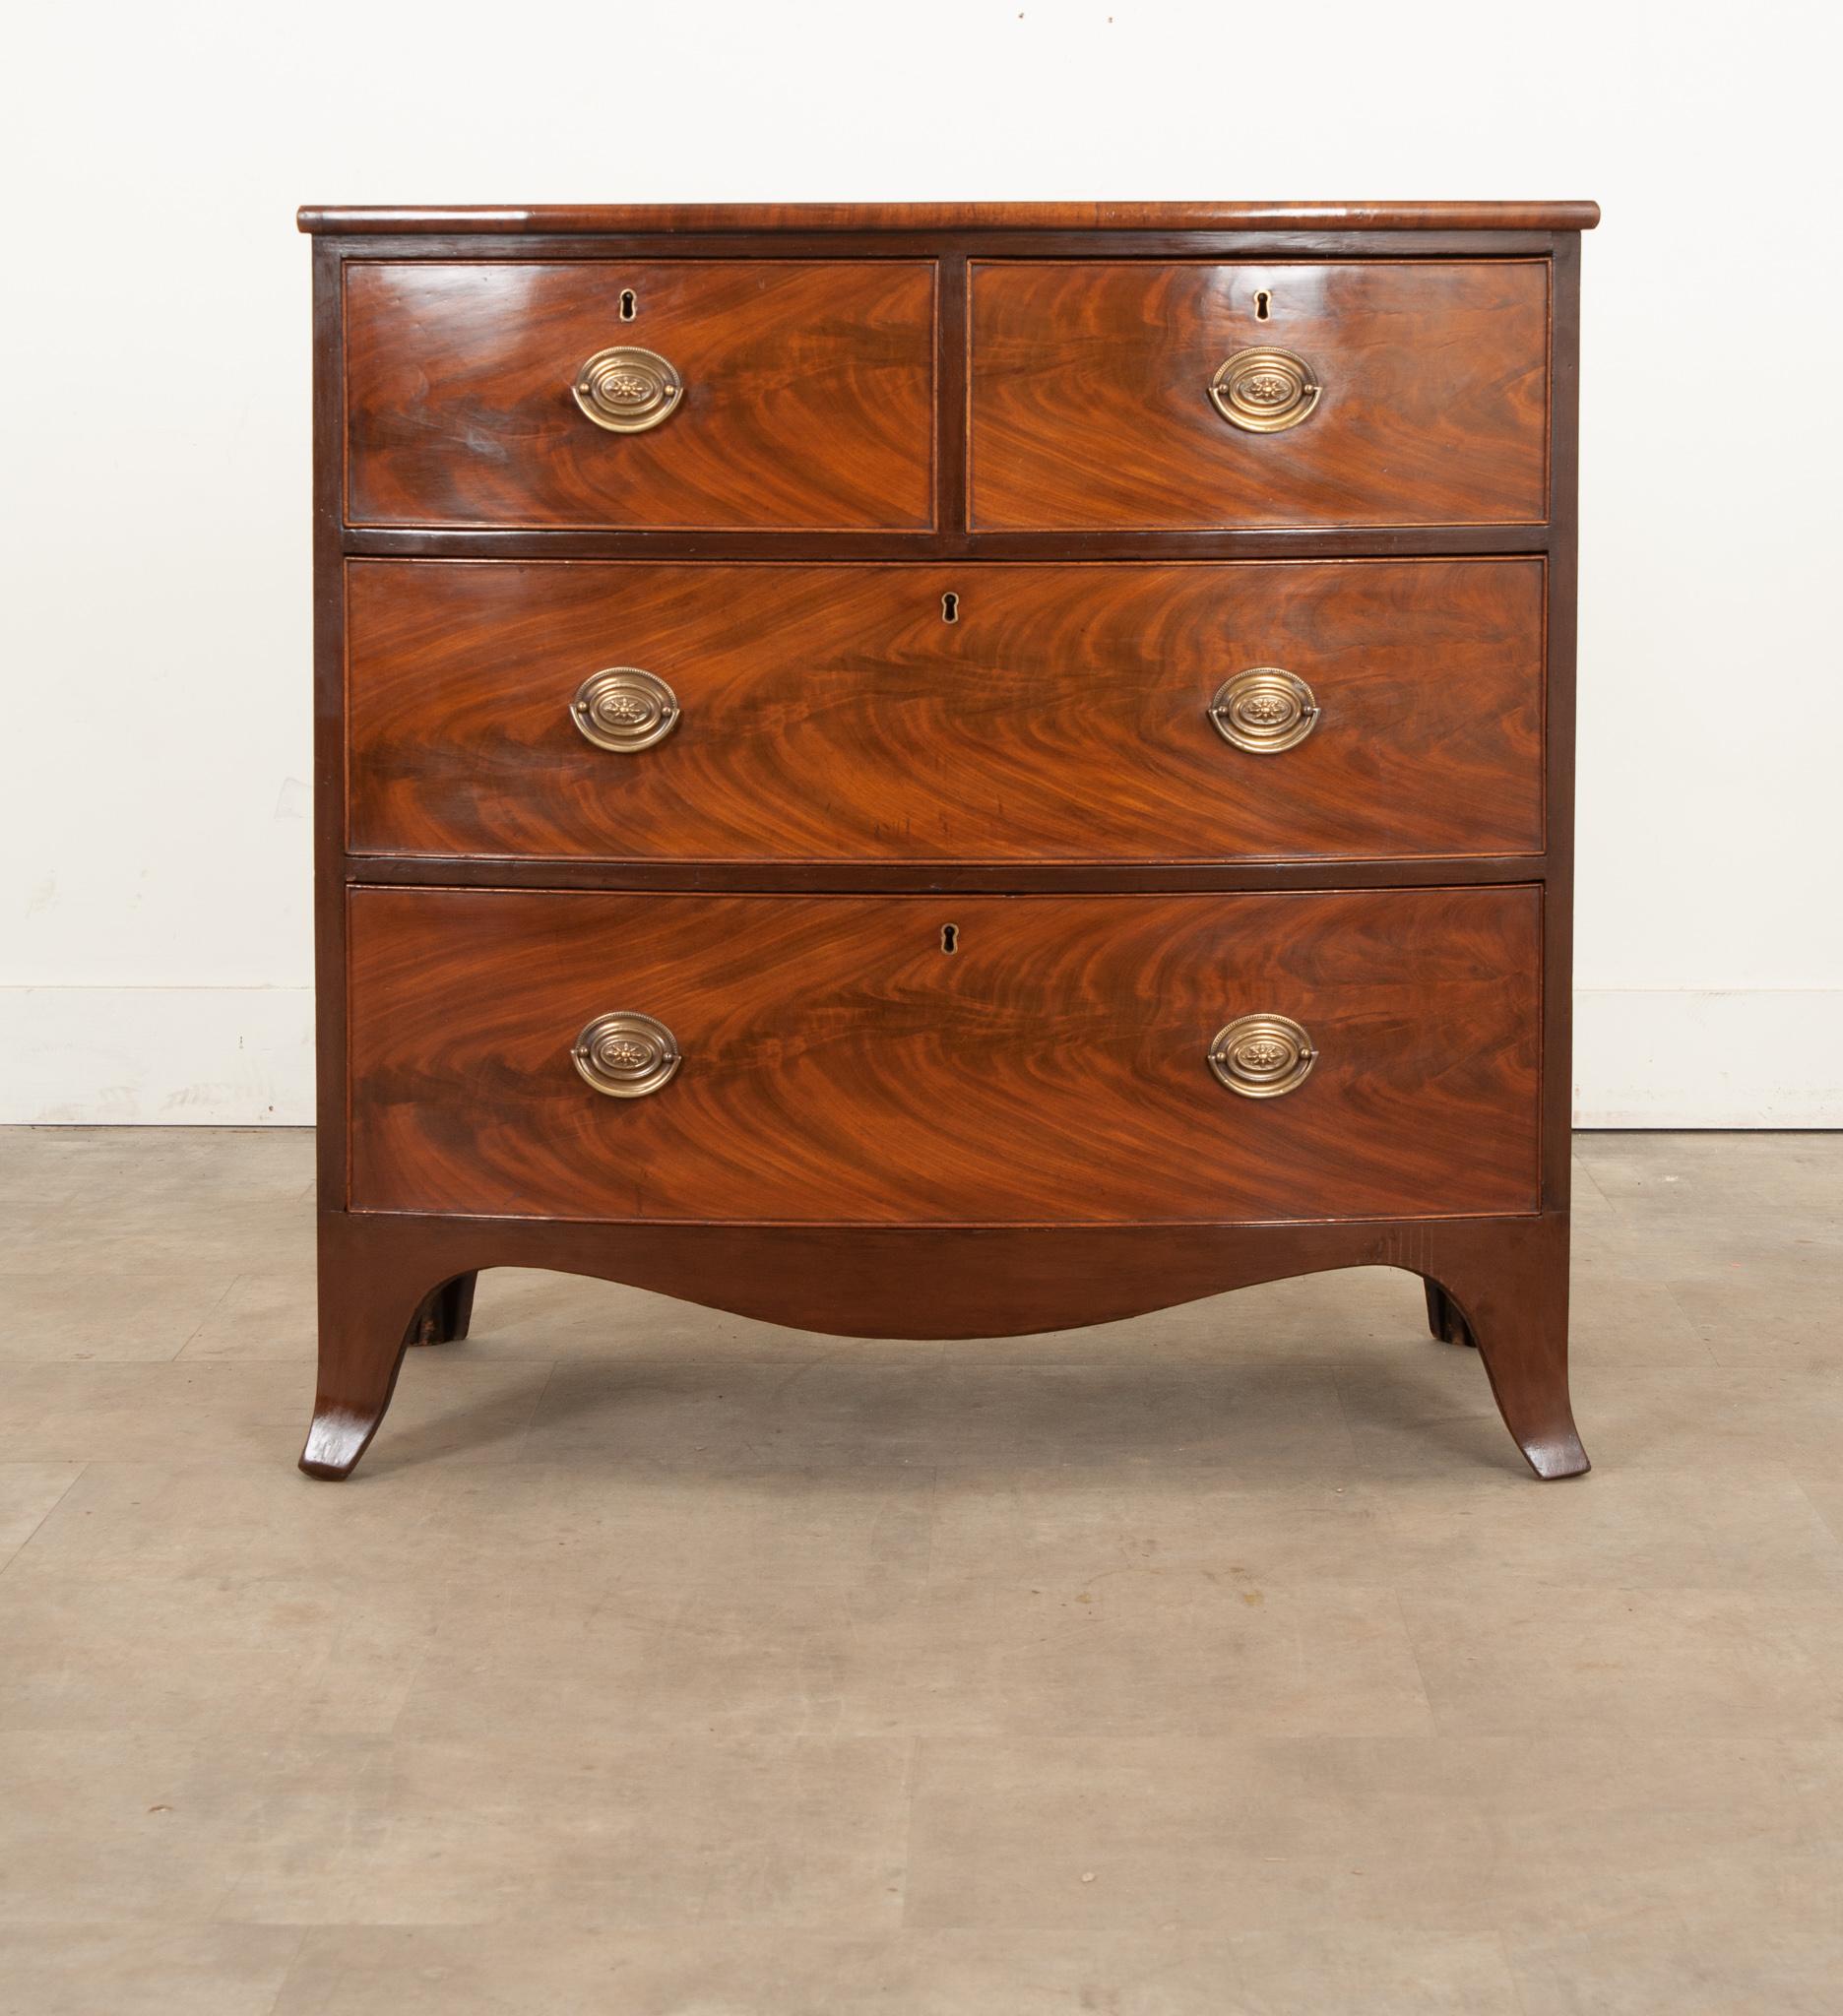 This is a splendid English 19th Century mahogany chest with a bow front. It has a beautiful patina from years of loving care and use. The top sits over four drawers, each with handsome oval brass pulls. All sit atop four splayed legs. Circa 1860. Be